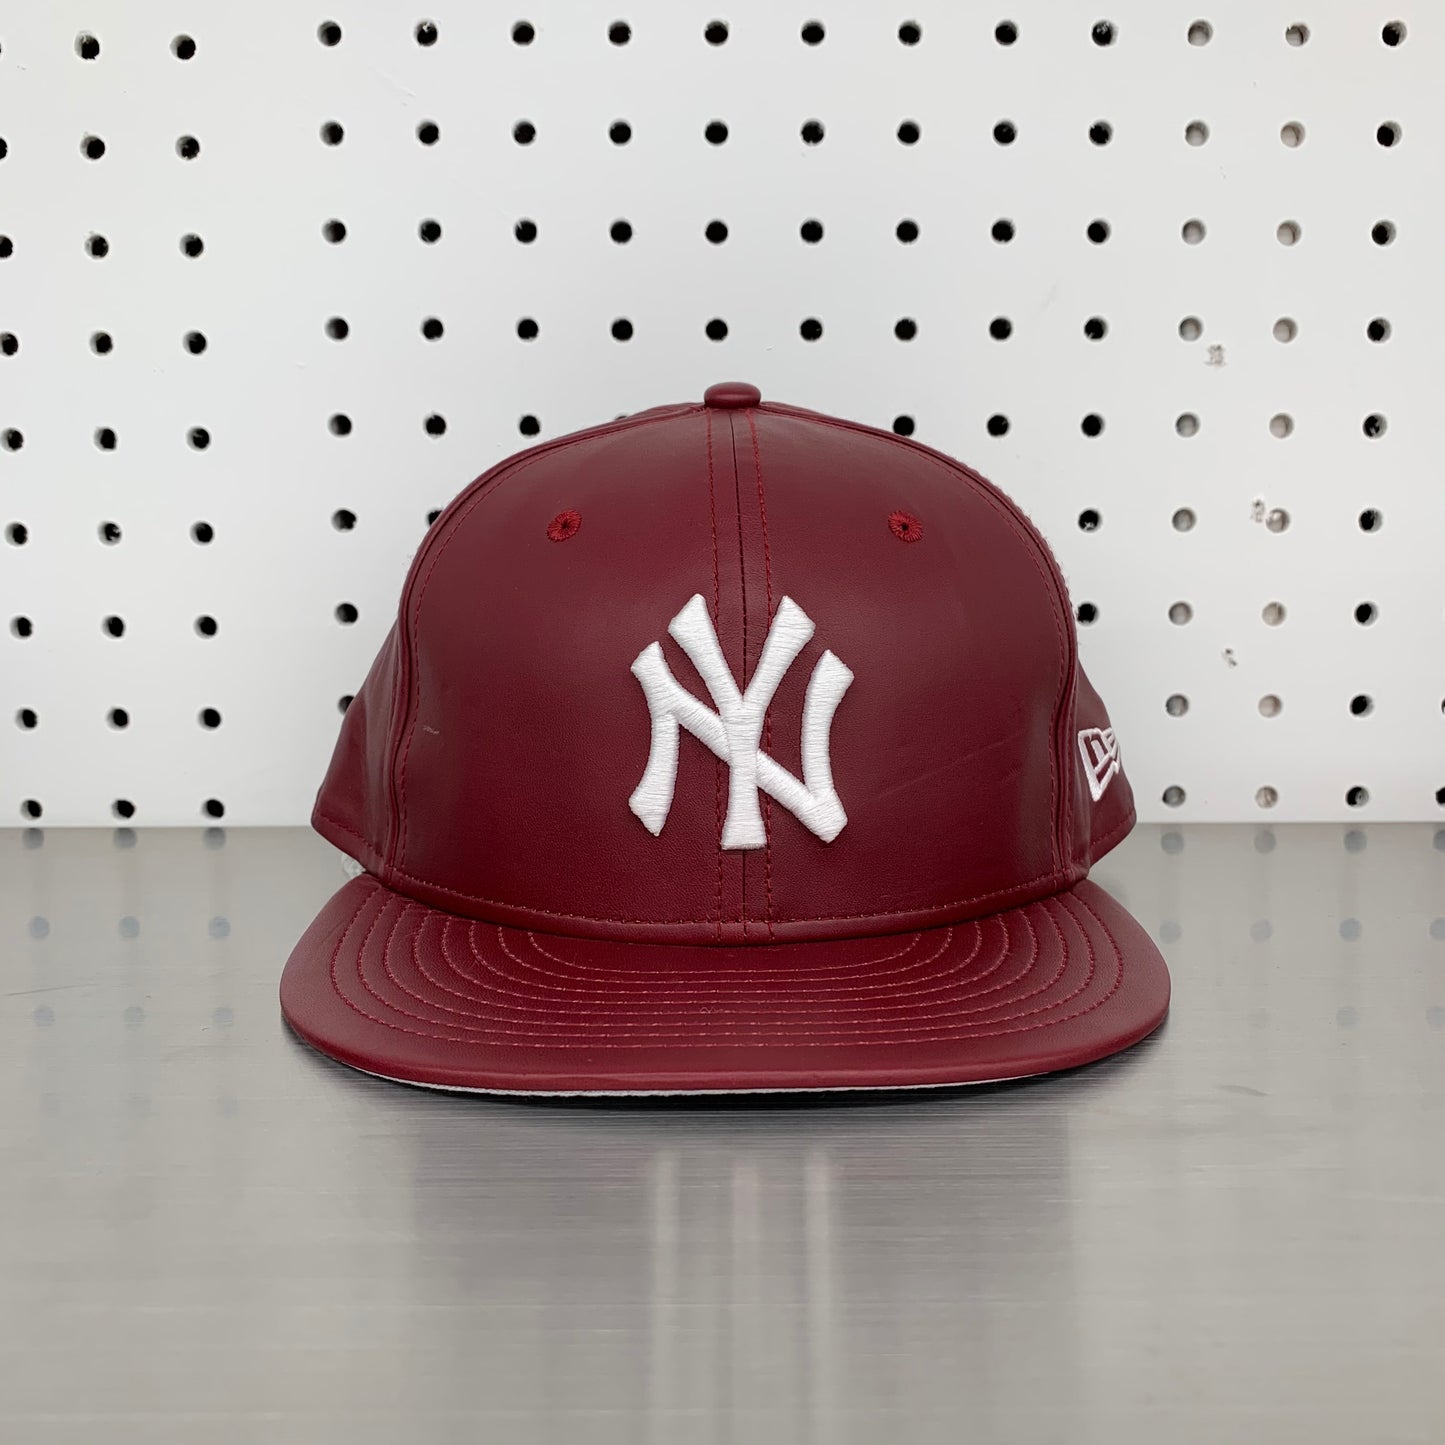 New York Yankees New Era 59FIFTY Fitted Cap "Burgundy Leather"